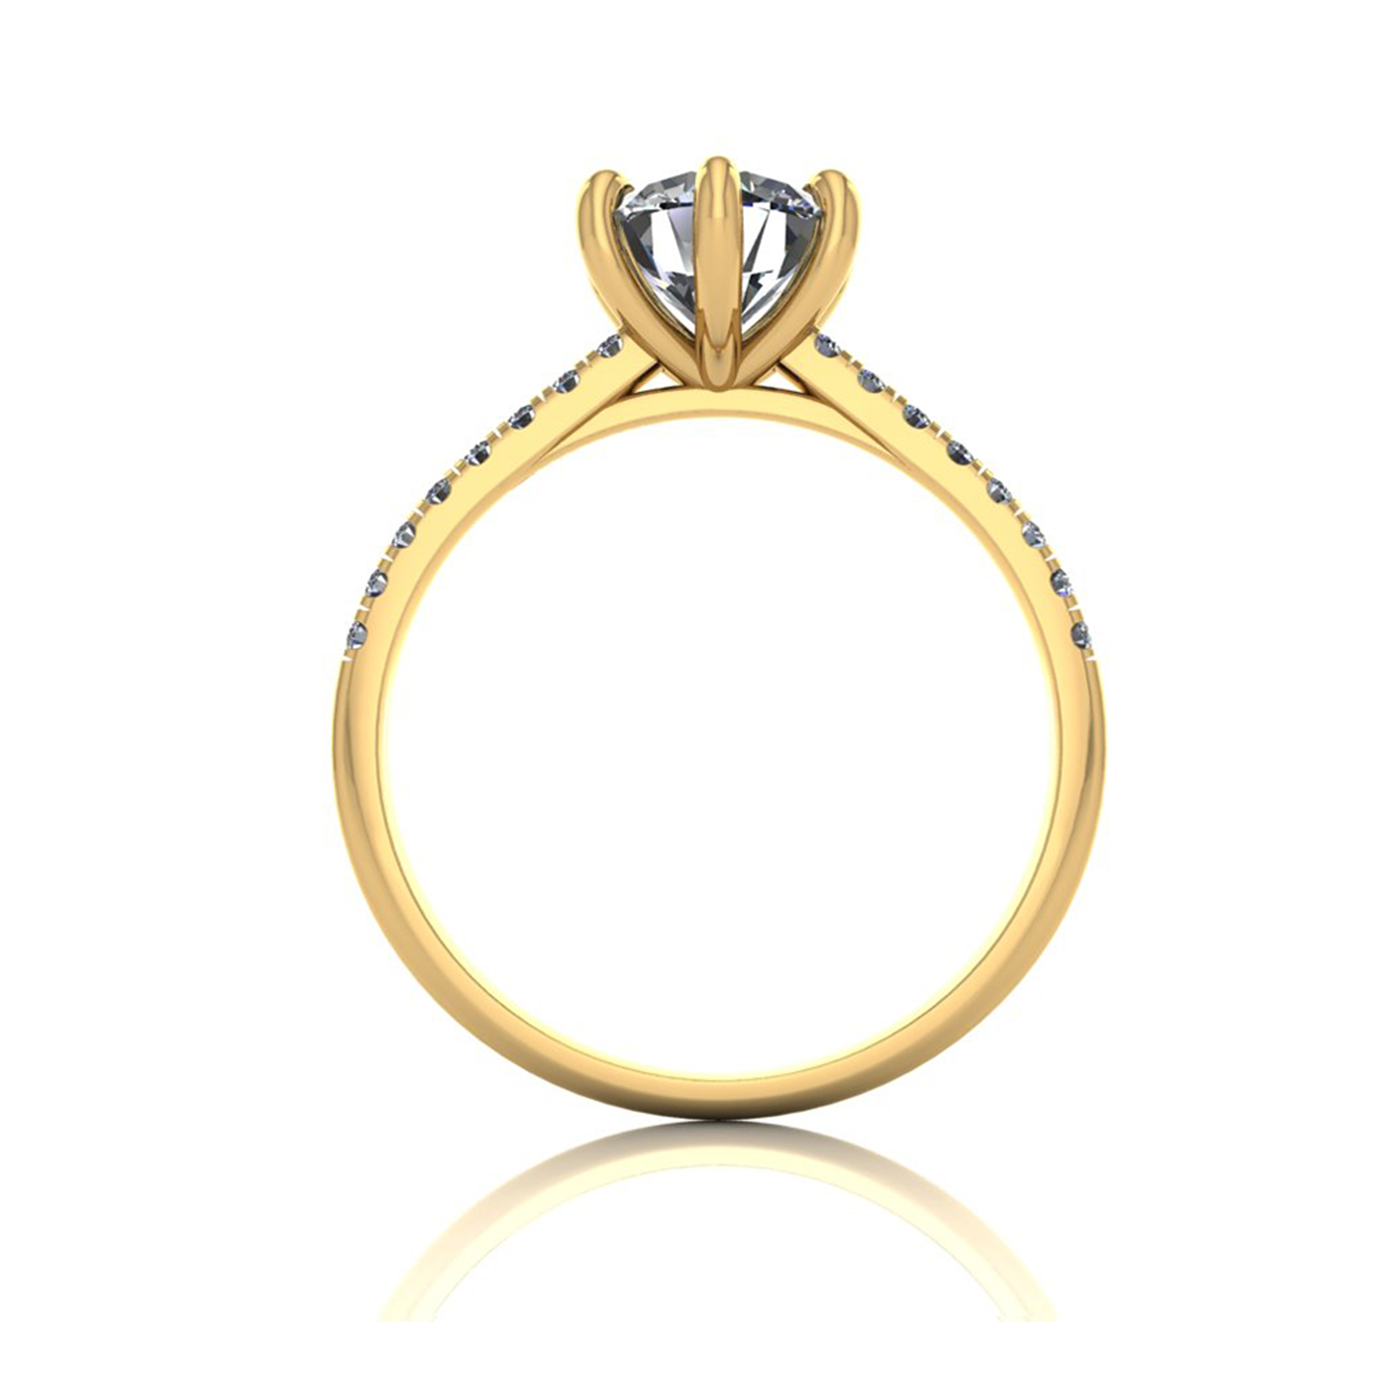 18k yellow gold 1,00 ct 6 prongs round cut diamond engagement ring with whisper thin pavÉ set band